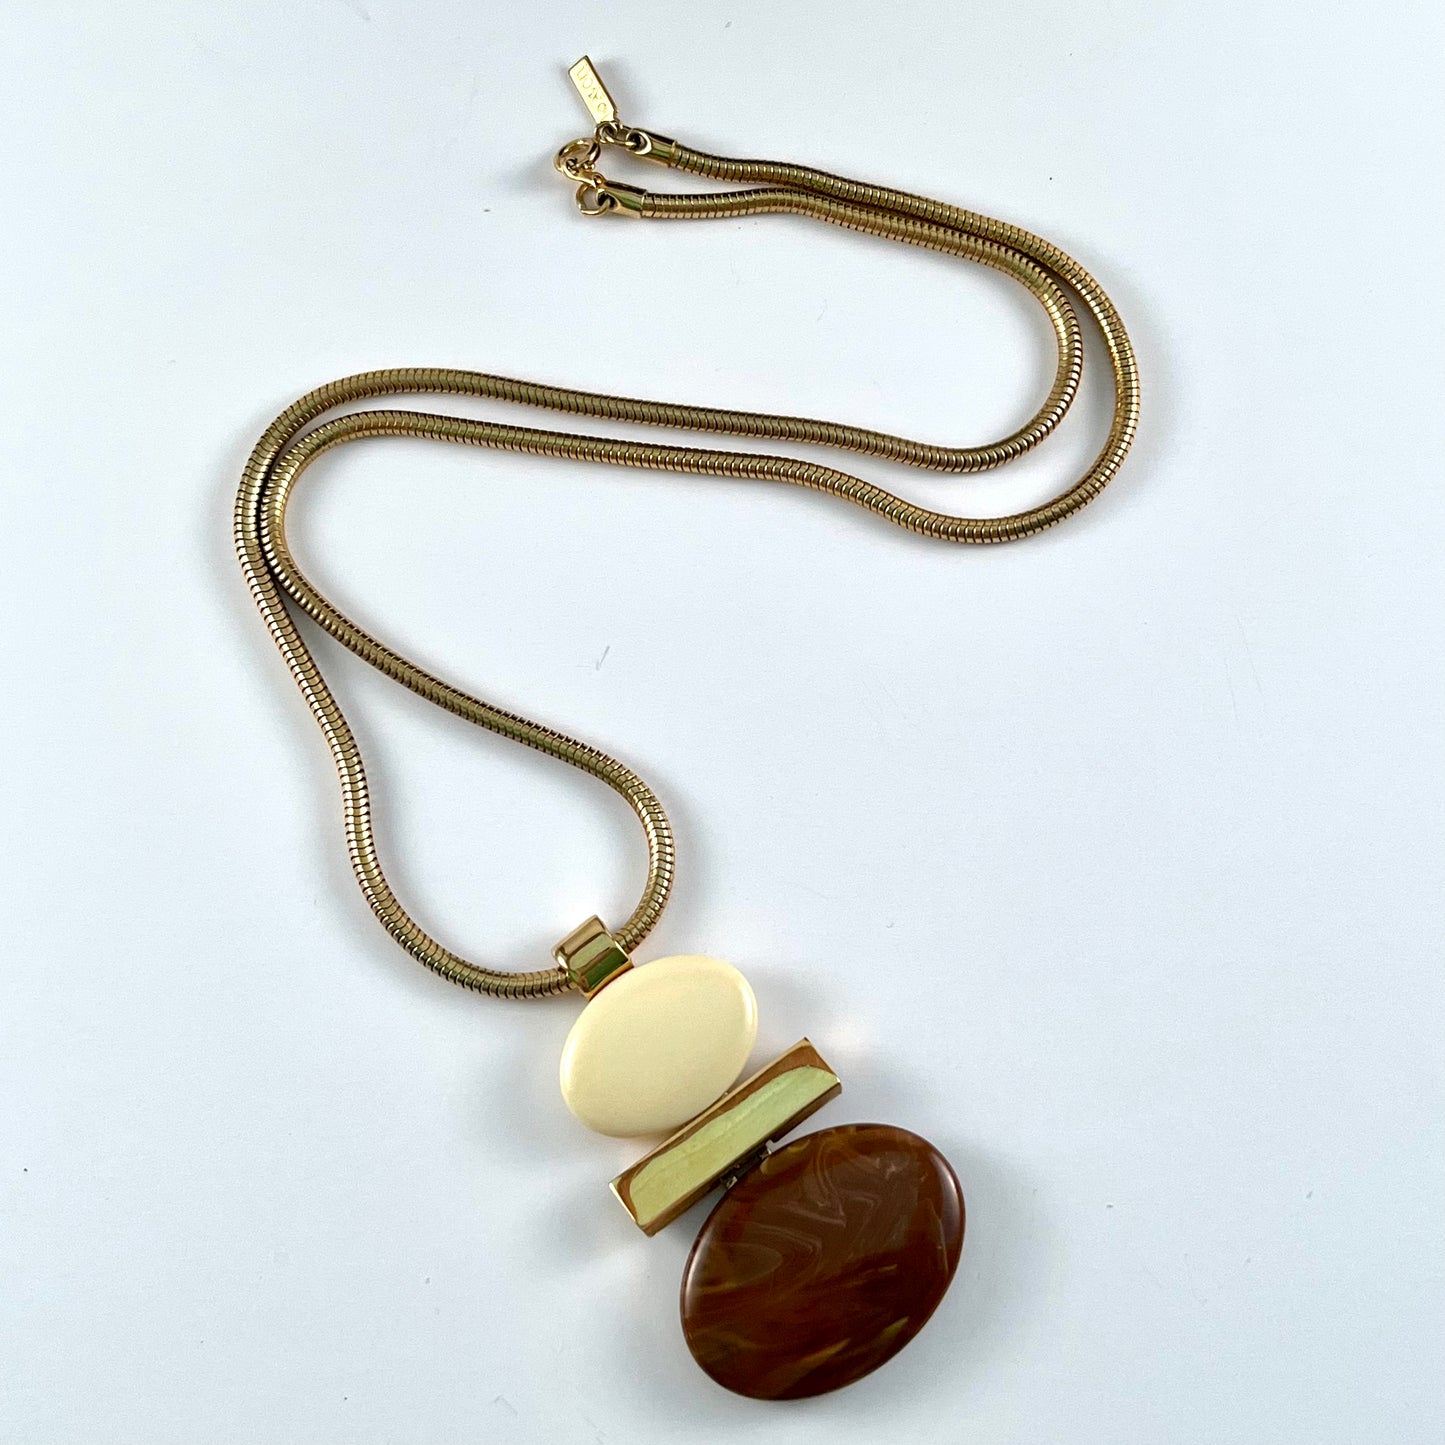 1976 Avon Polished Oval Necklace Designed by S.M. Kent